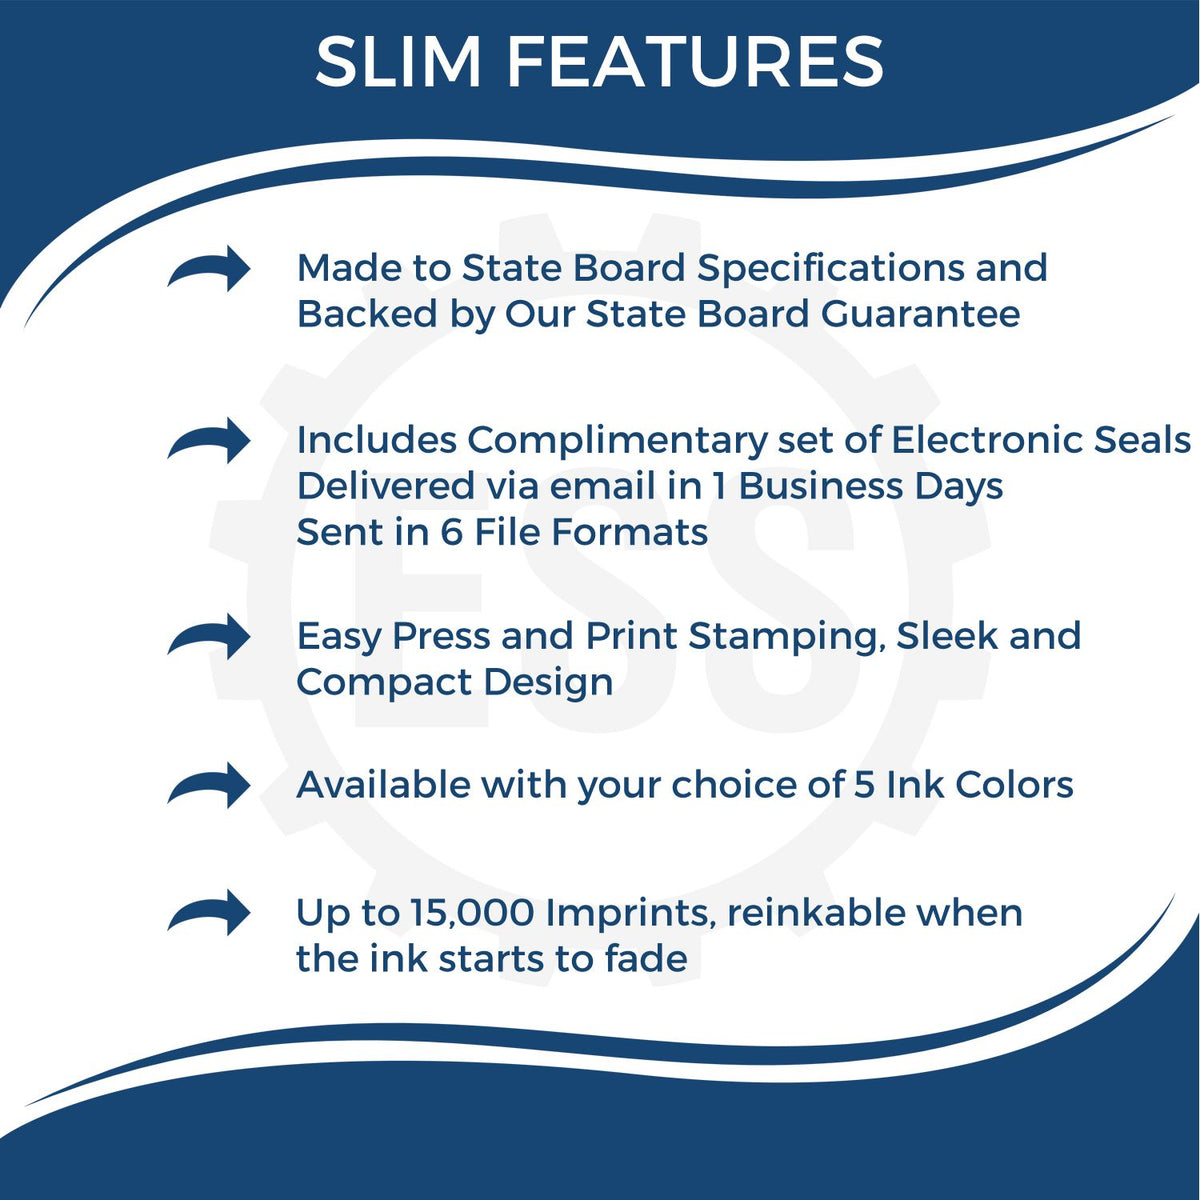 A picture of an infographic highlighting the selling points for the Slim Pre-Inked Texas Architect Seal Stamp